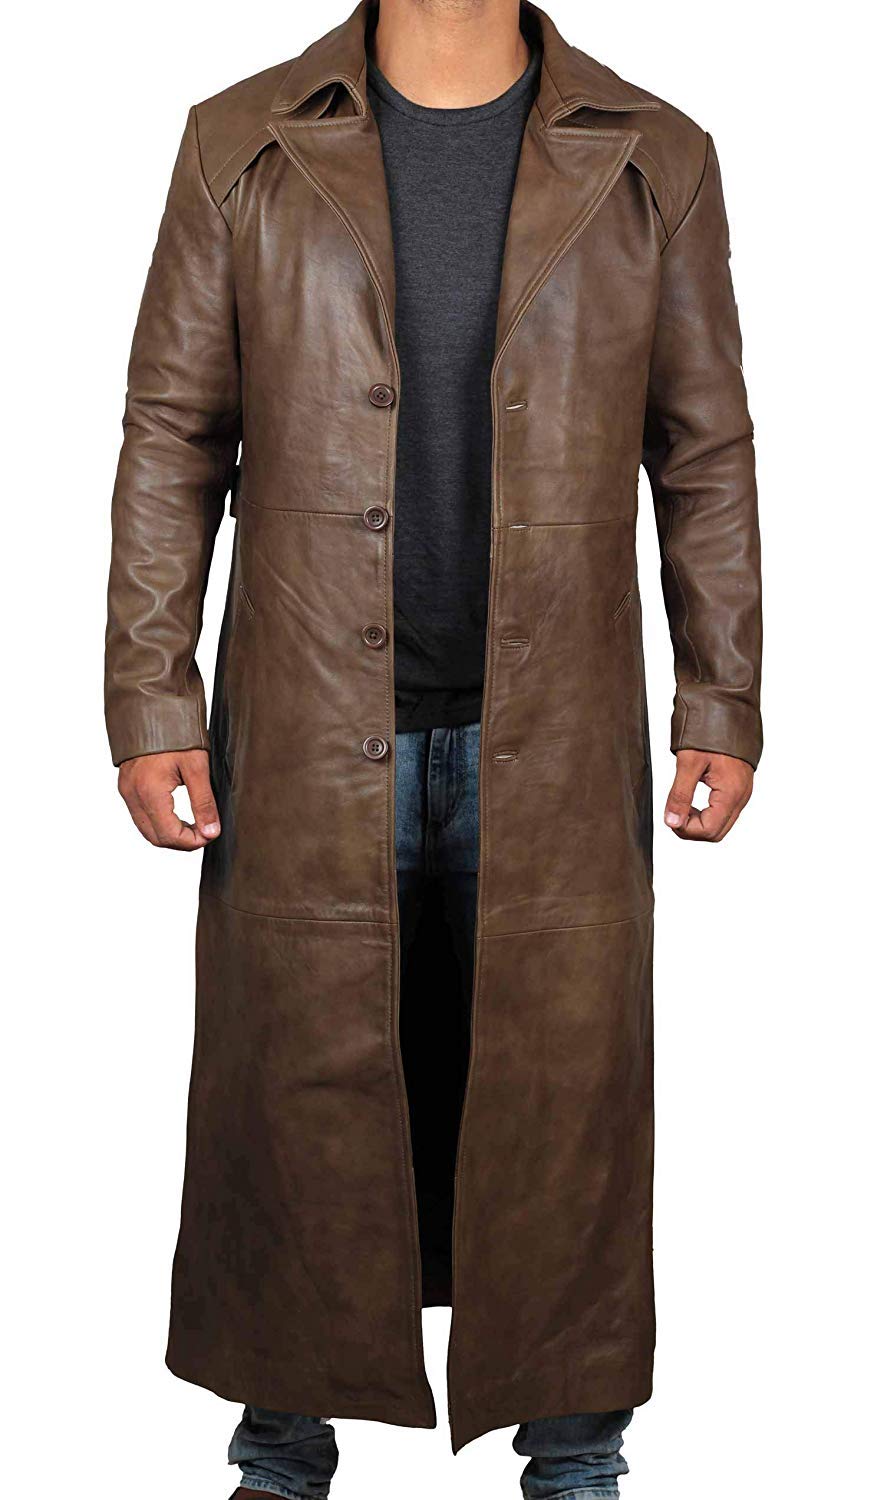 Brown Winter Trench Coat Men - Distressed Black Real Leather Long Overcoat